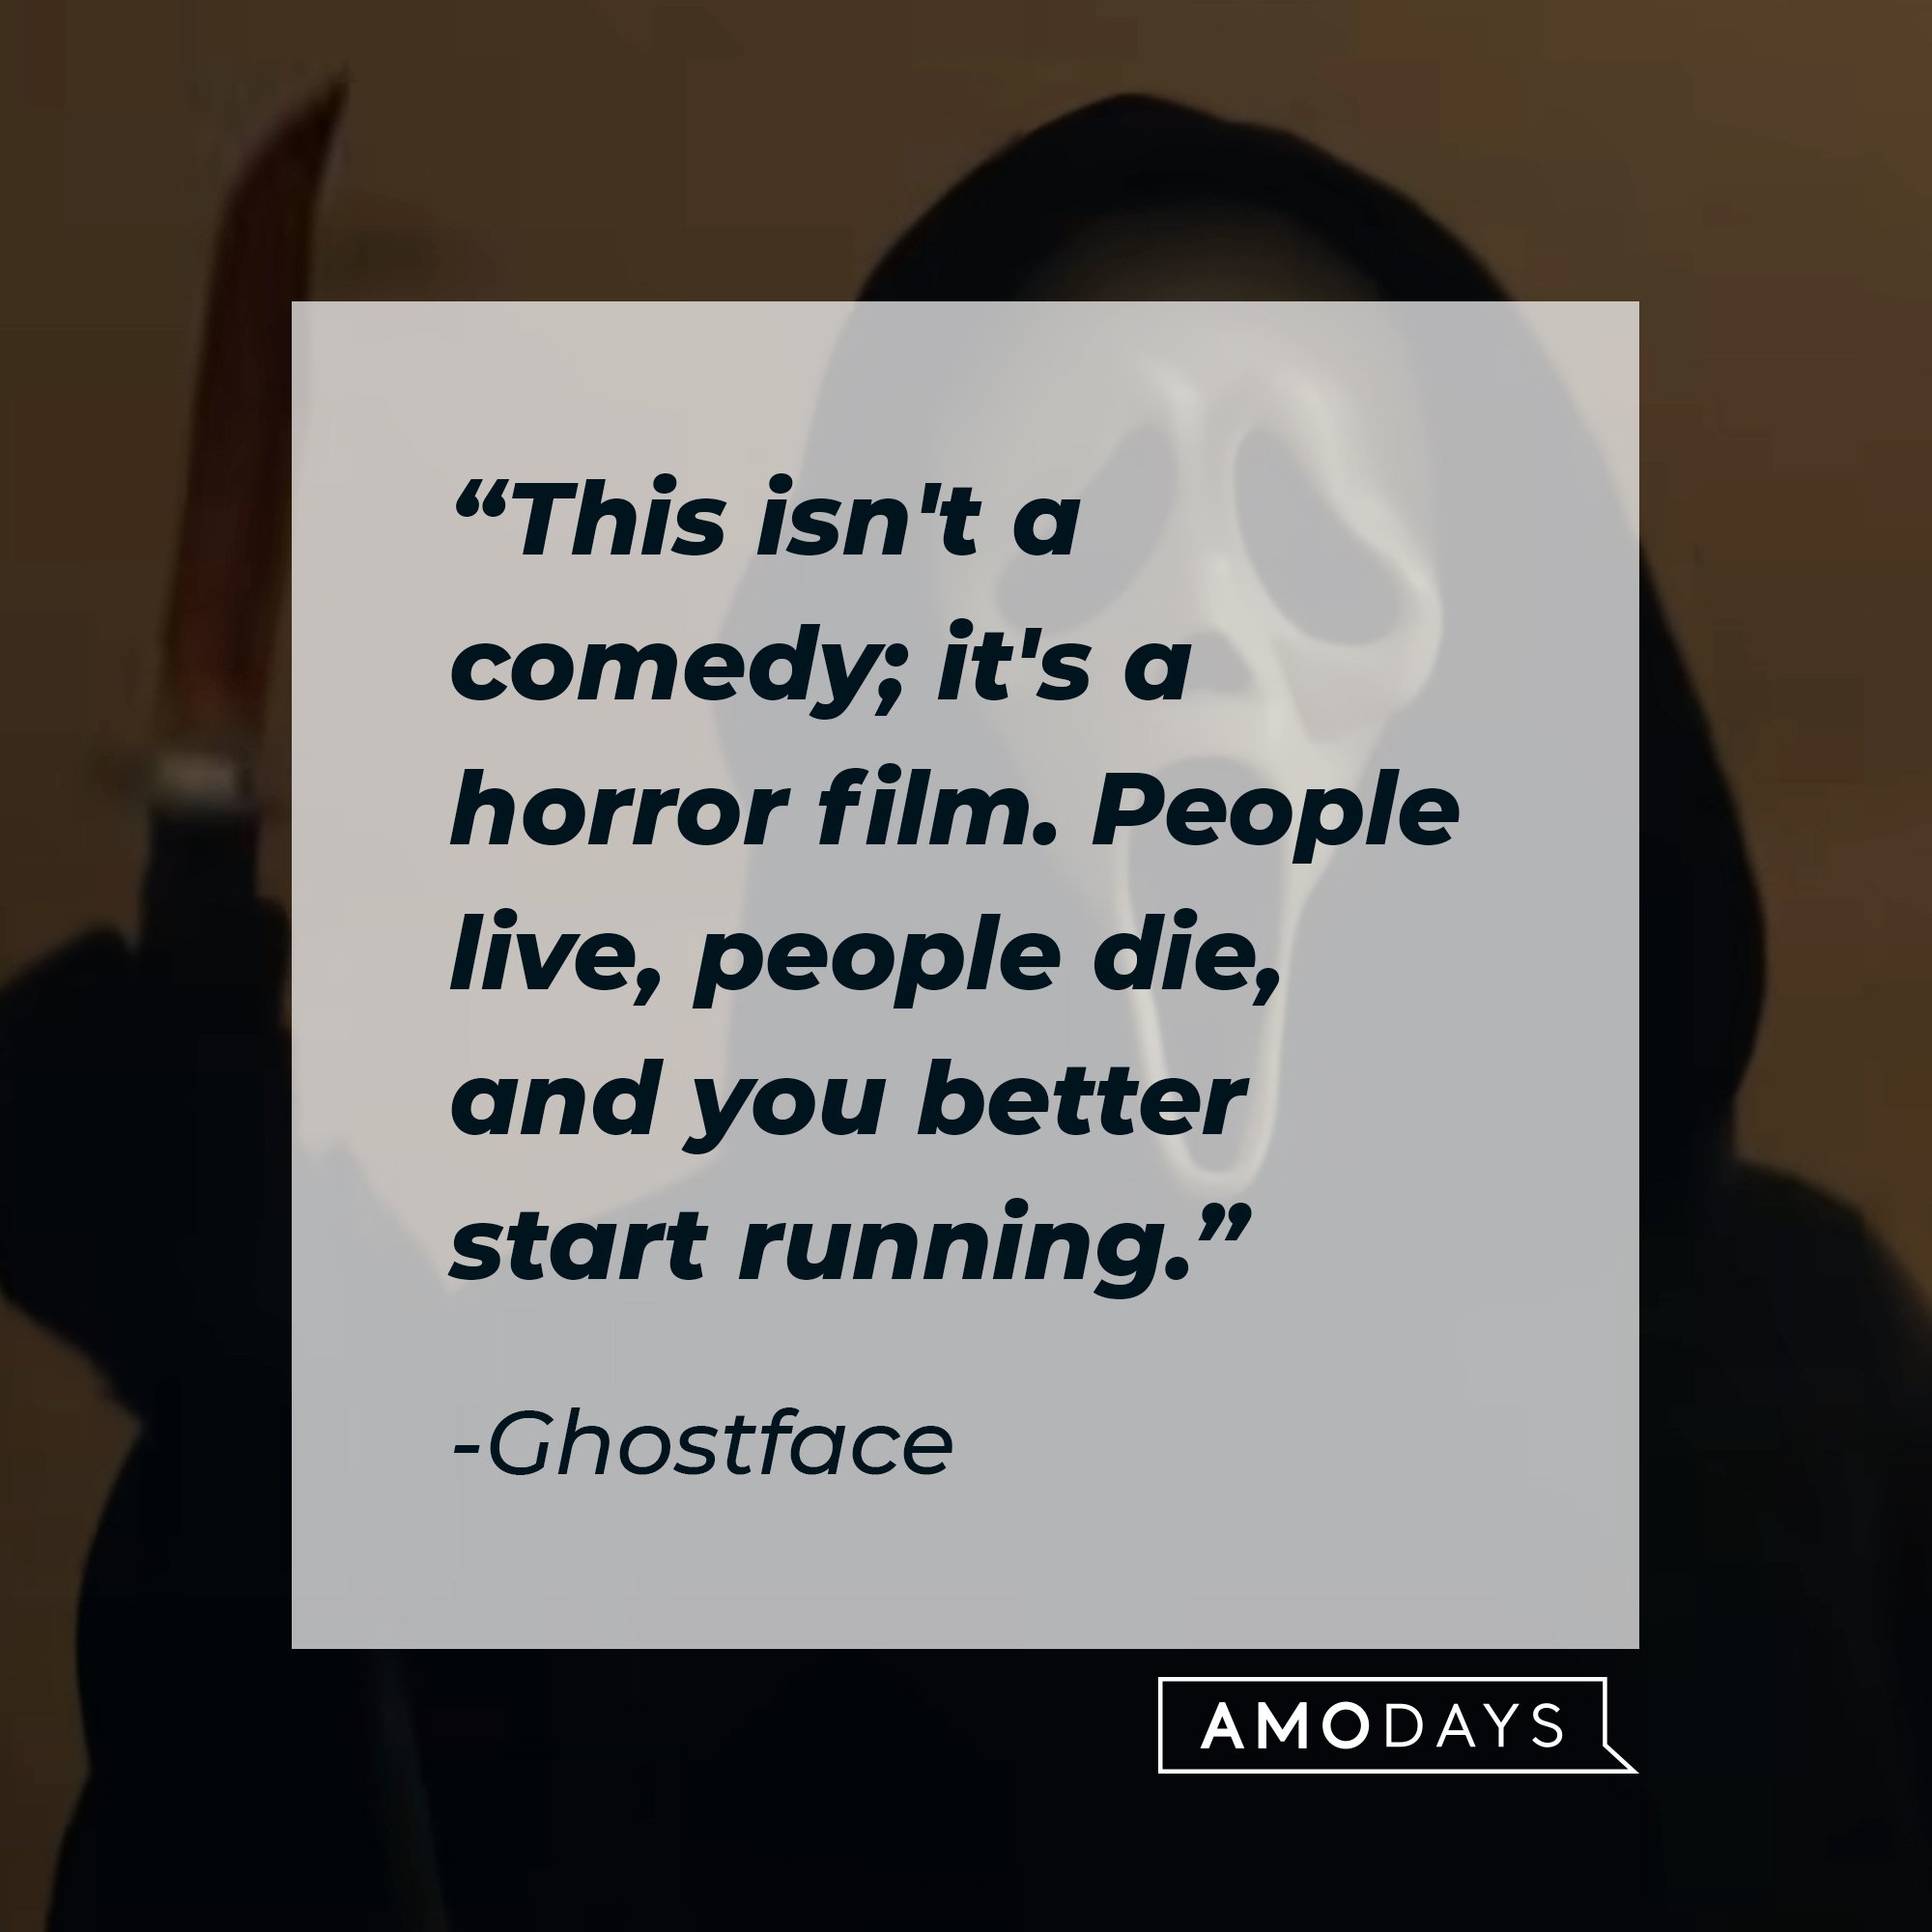 Ghostface's quote: "This isn't a comedy; it's a horror film. People live, people die, and you better start running." | Image: AmoDays